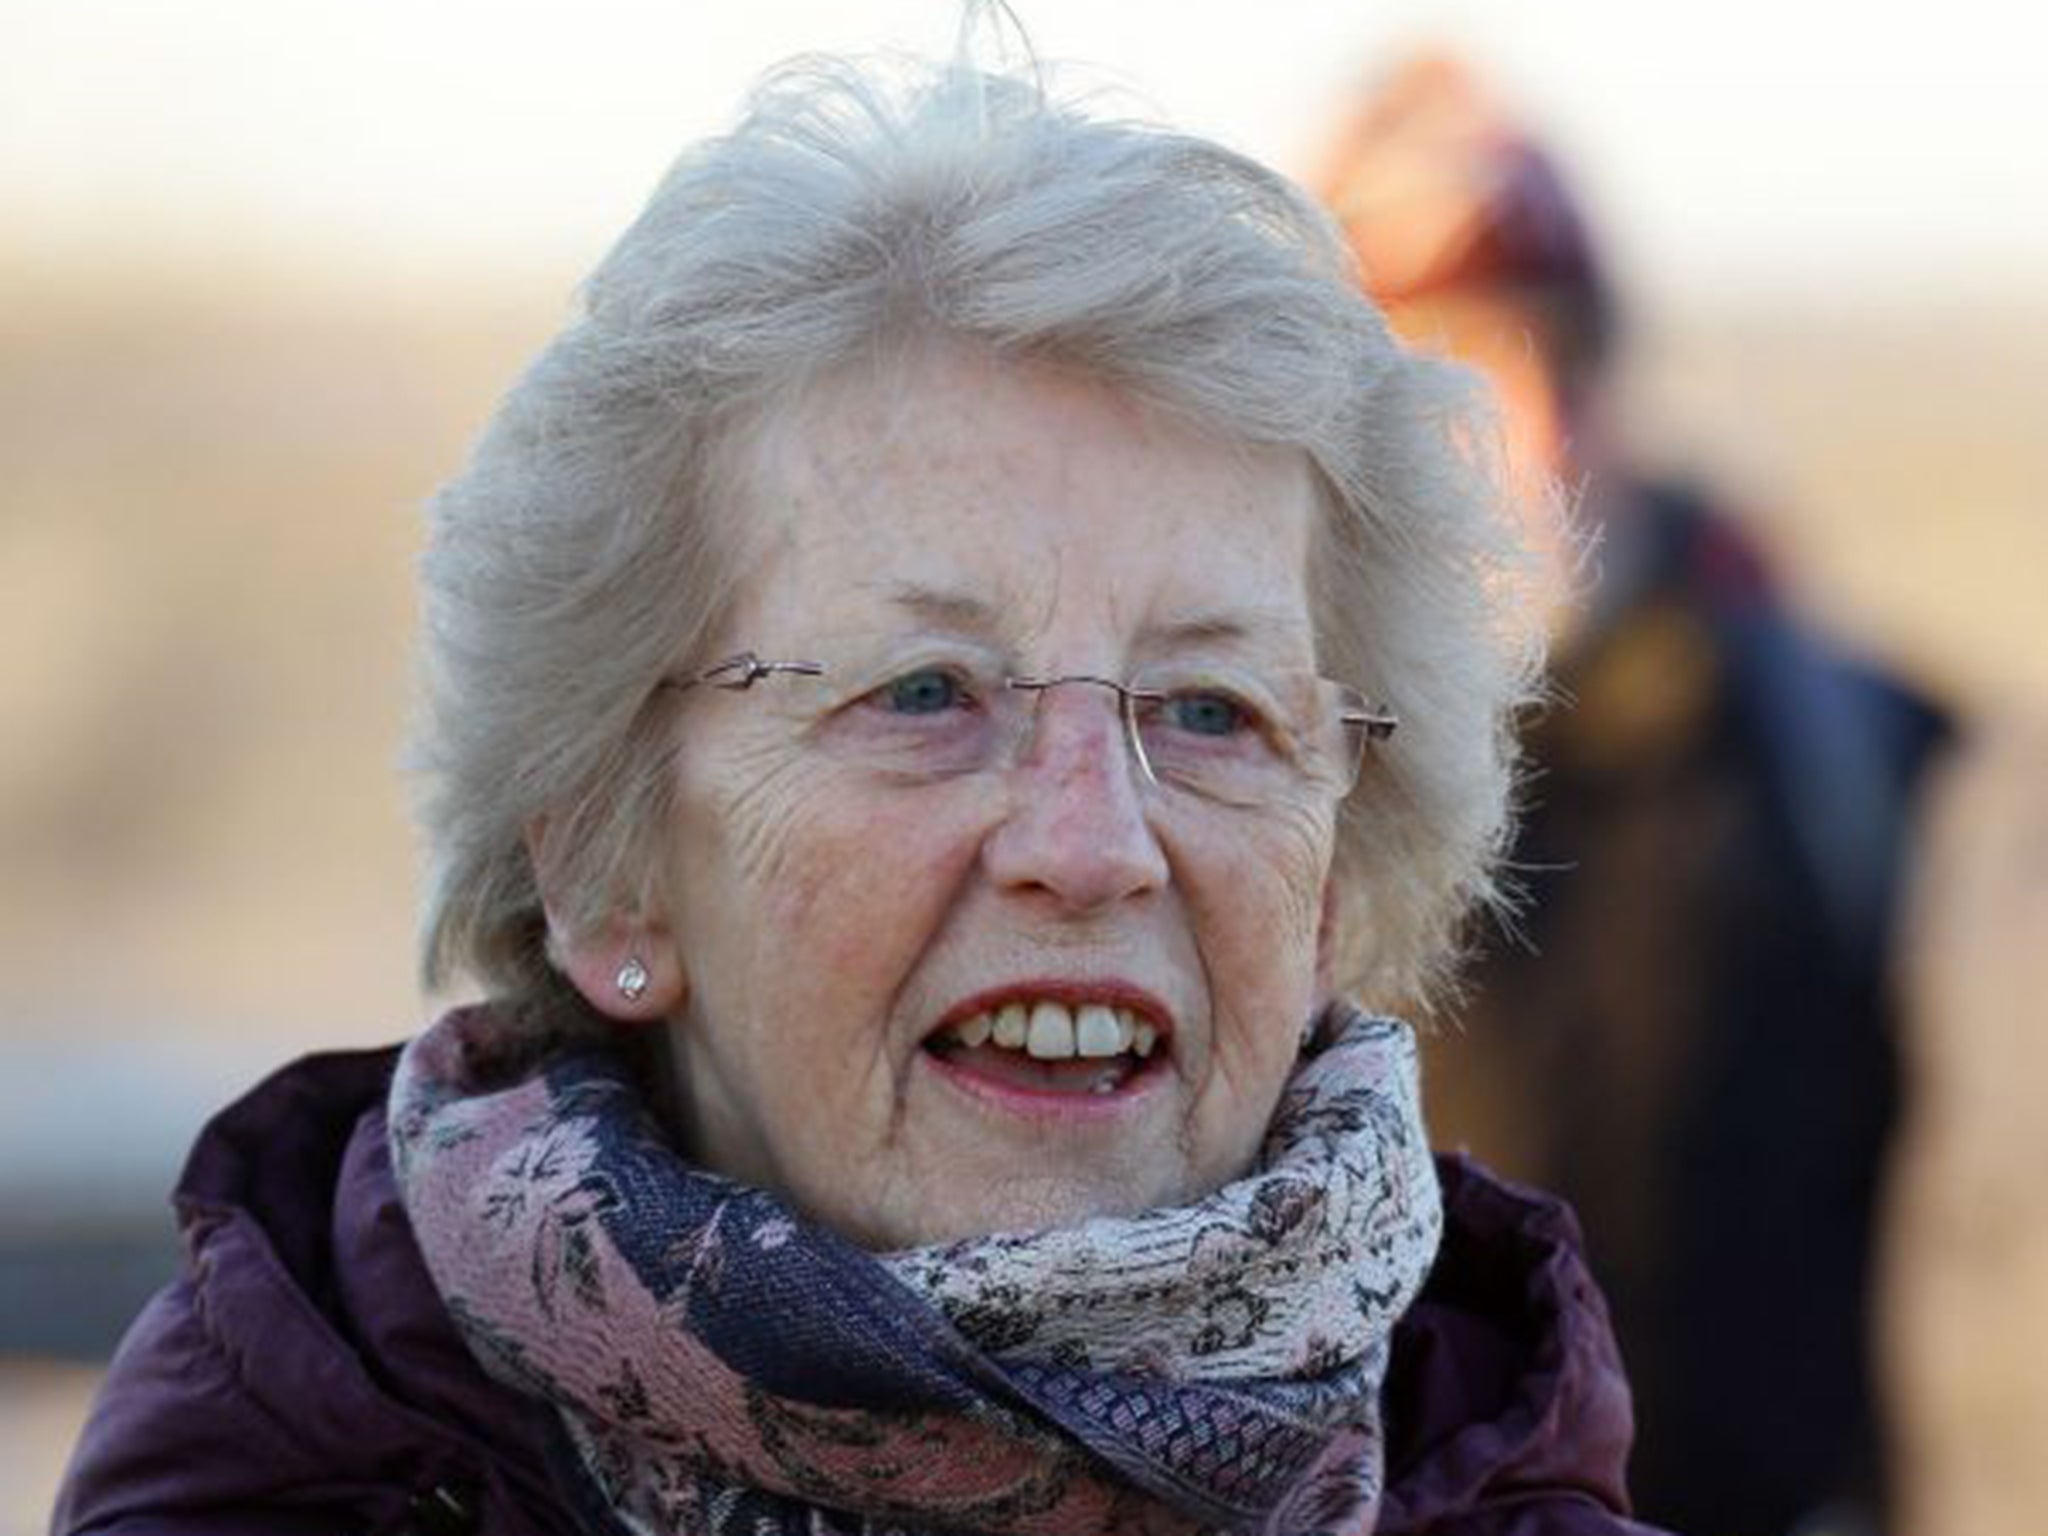 Tim's mother, Anglea Peake, was among the crowd of onlookers as the Soyuz FG rocket was rolled out on to the launch pad